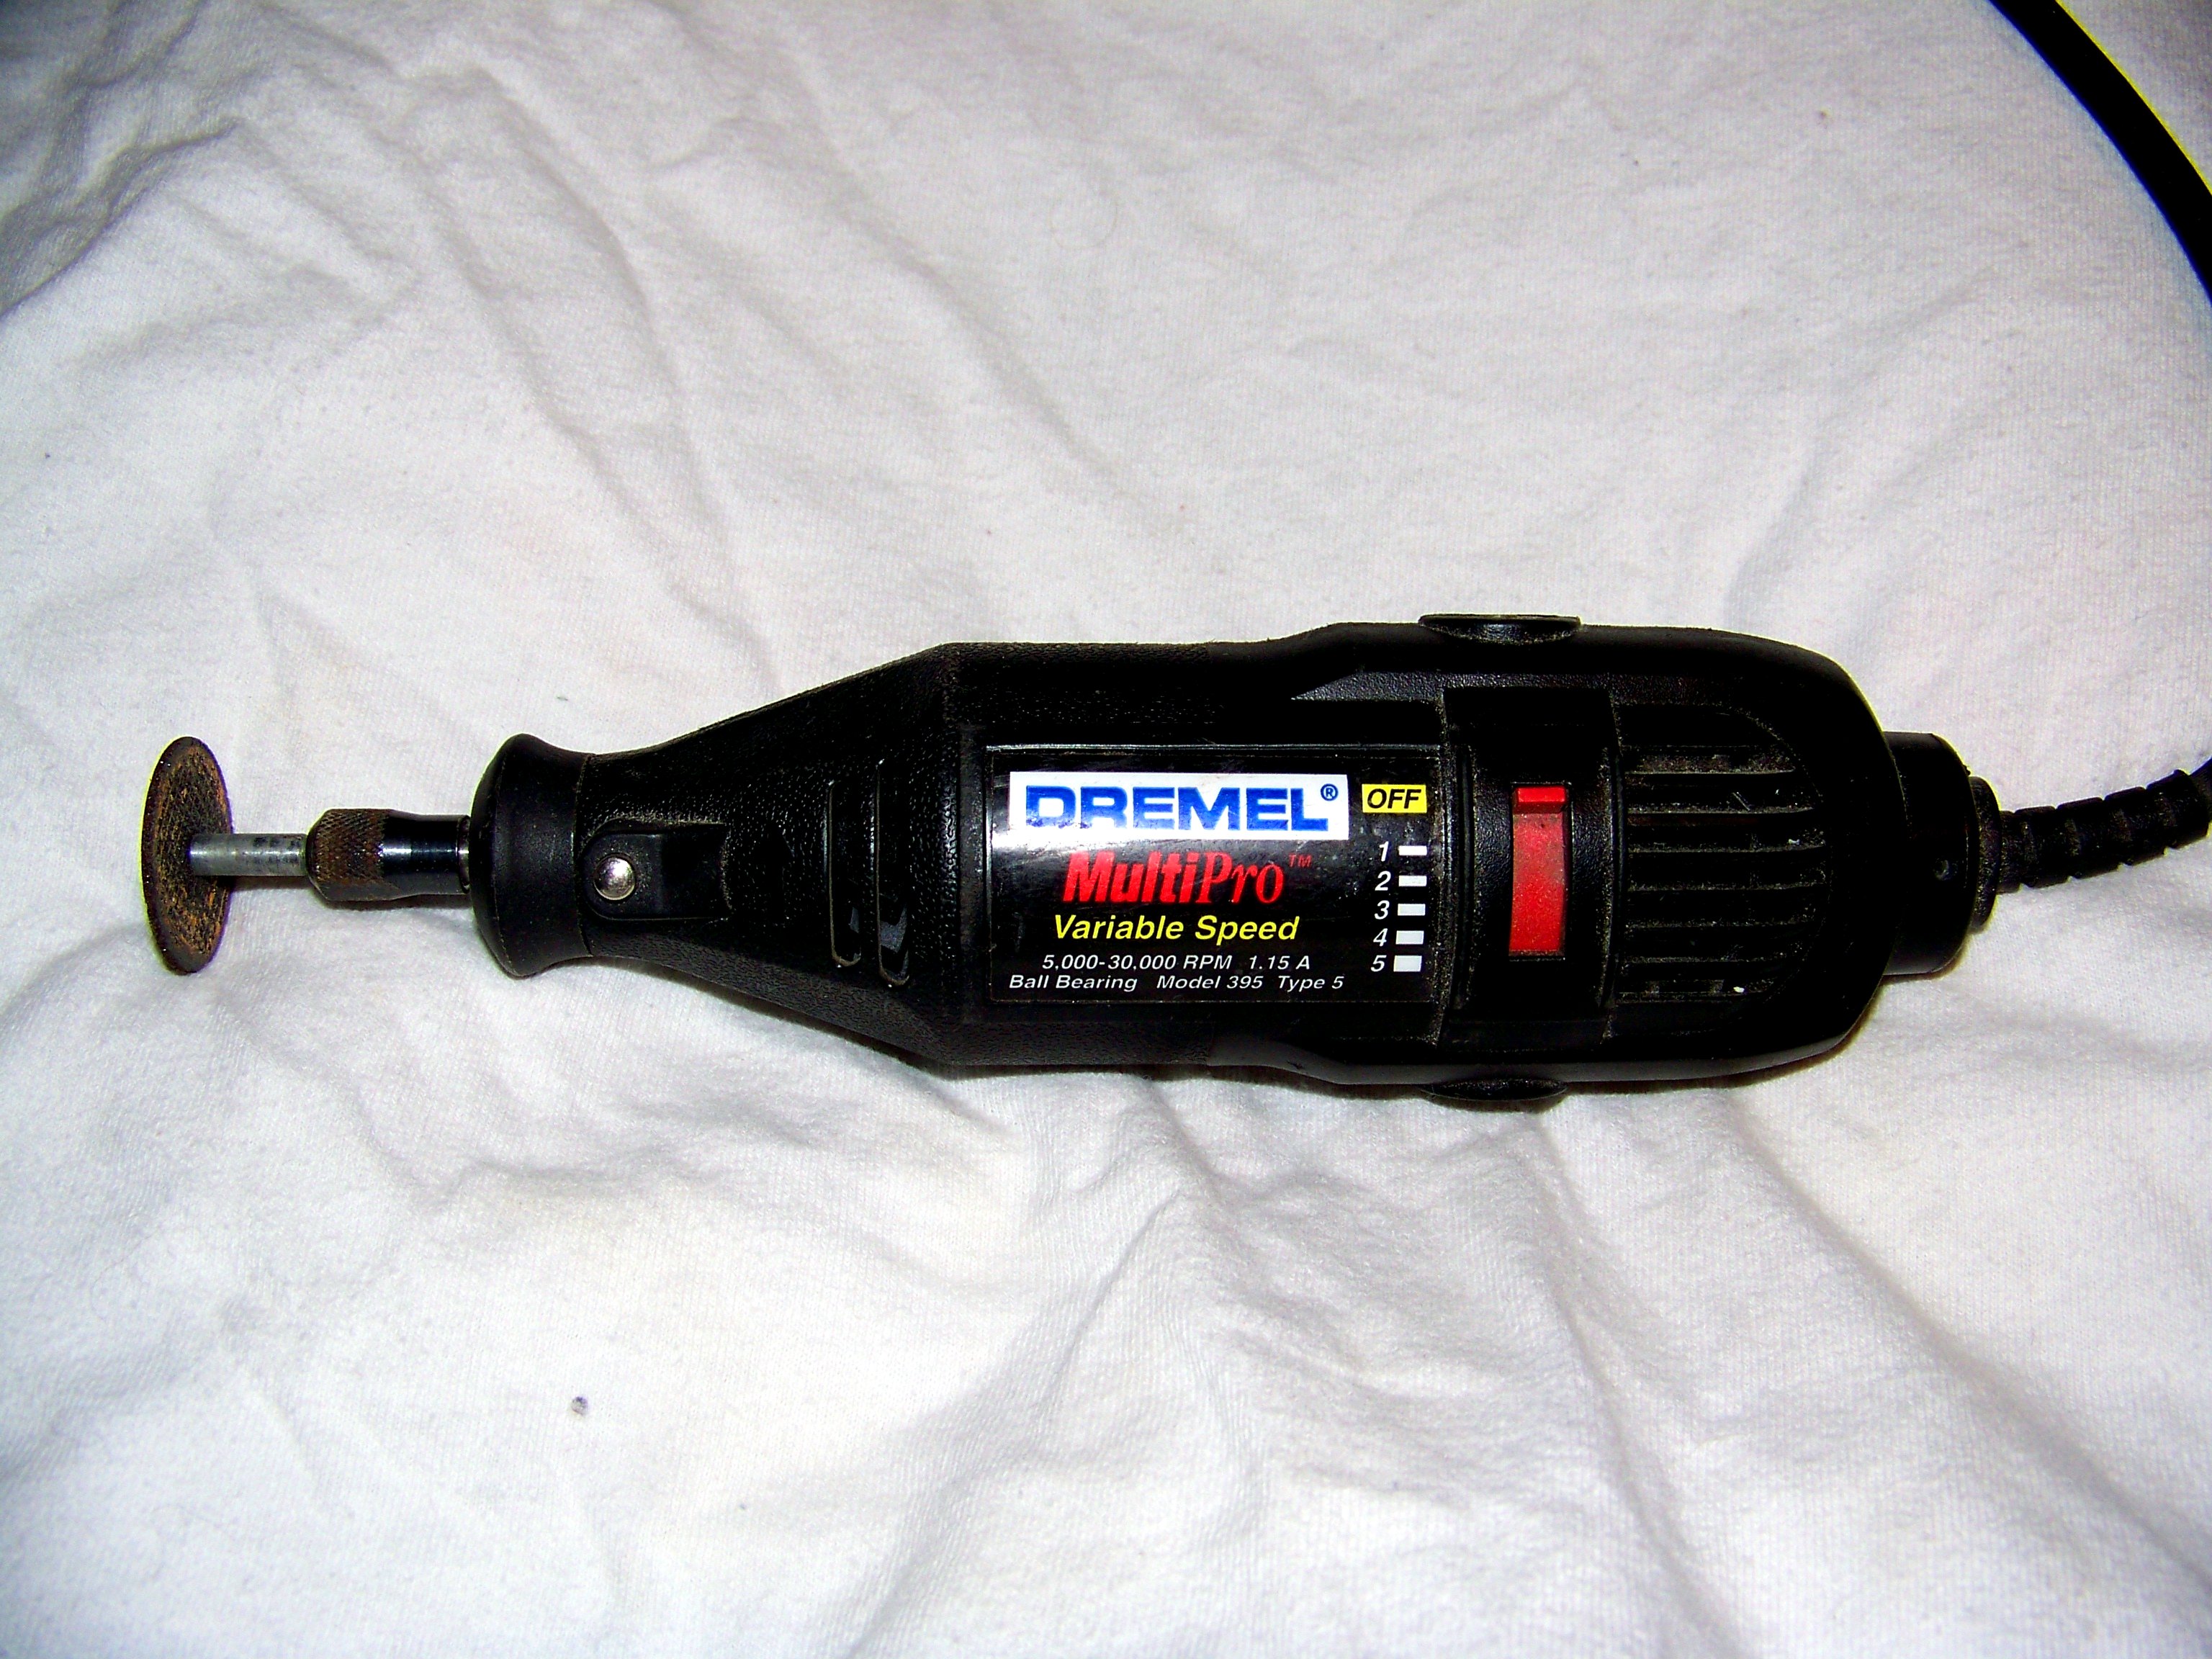 How To Tighten Up A Sloppy Second Hand Dremel